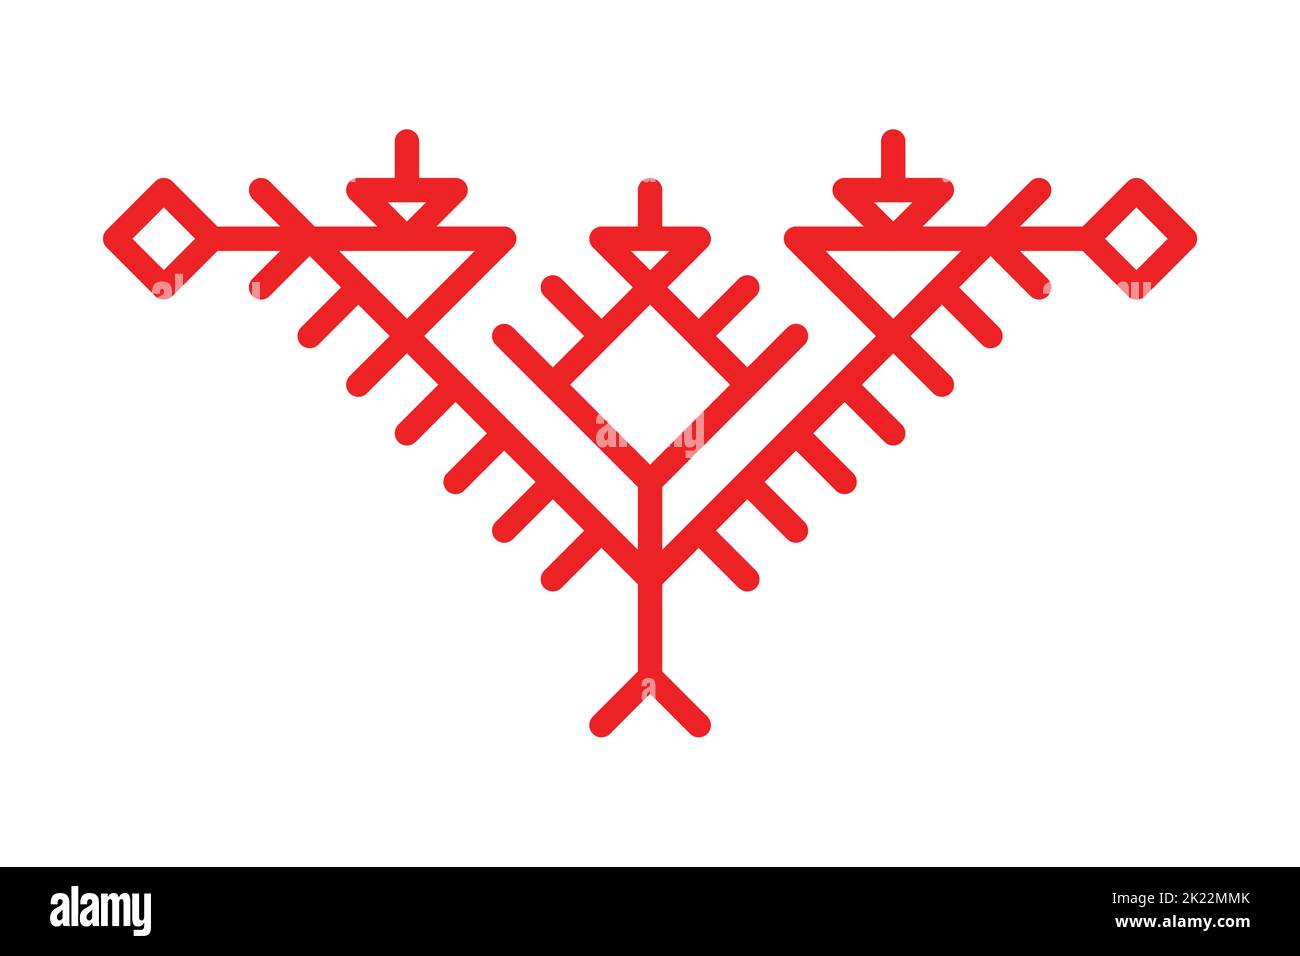 Vector isolated flat concept with red simplified symbol of flower. Outline icon of traditional ornamental element of Karelia and Finland peoples. Deco Stock Vector